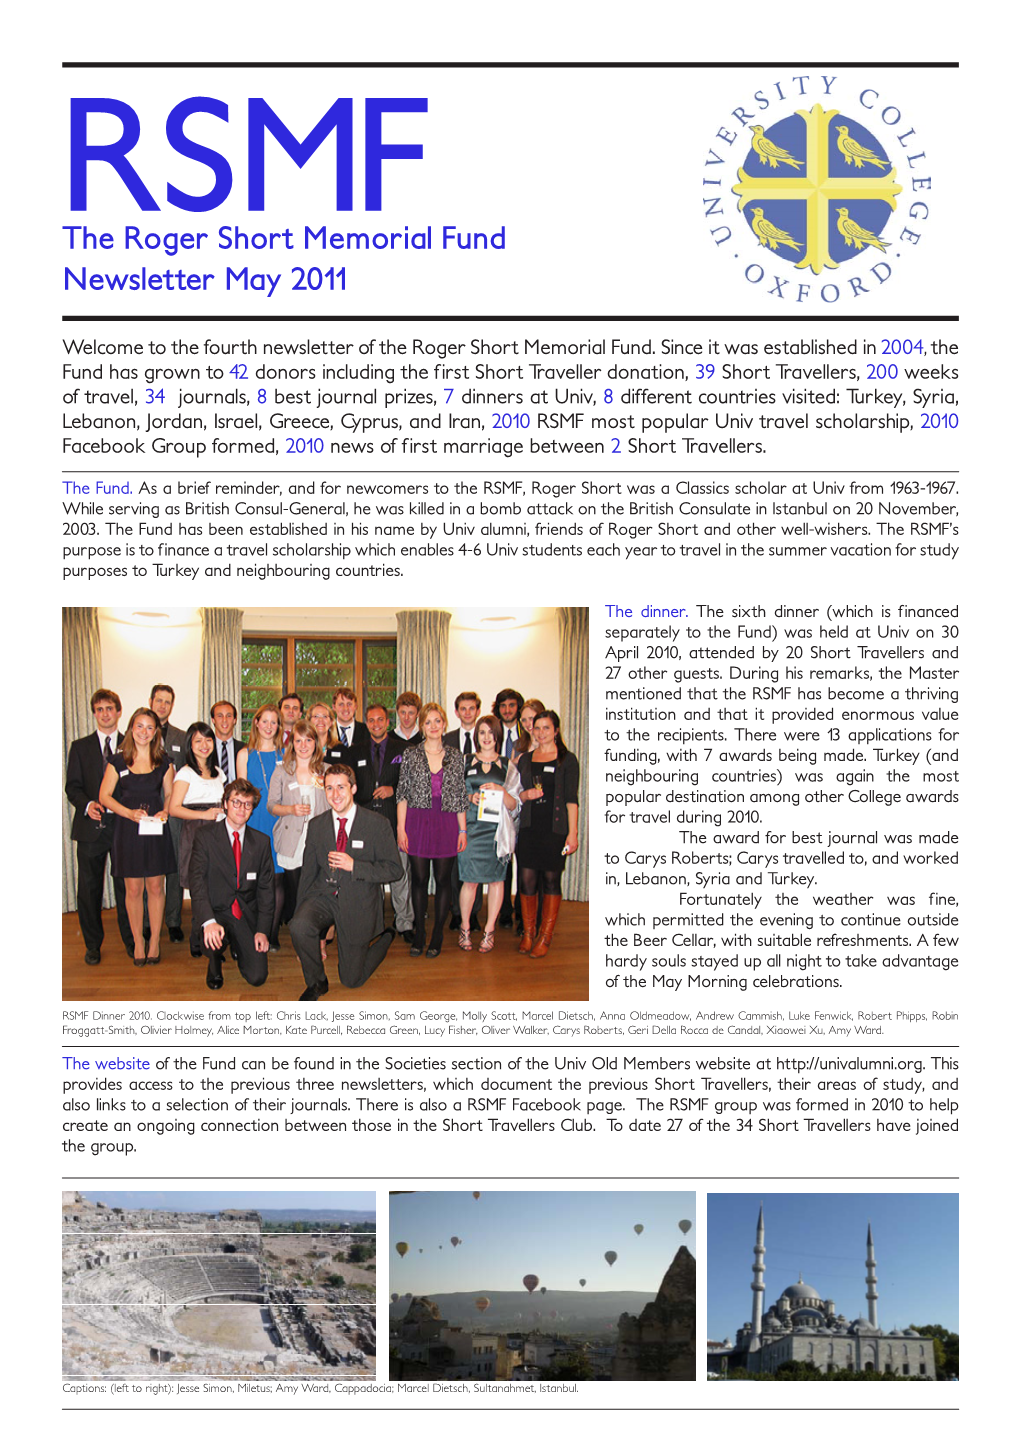 The Roger Short Memorial Fund Newsletter May 2011